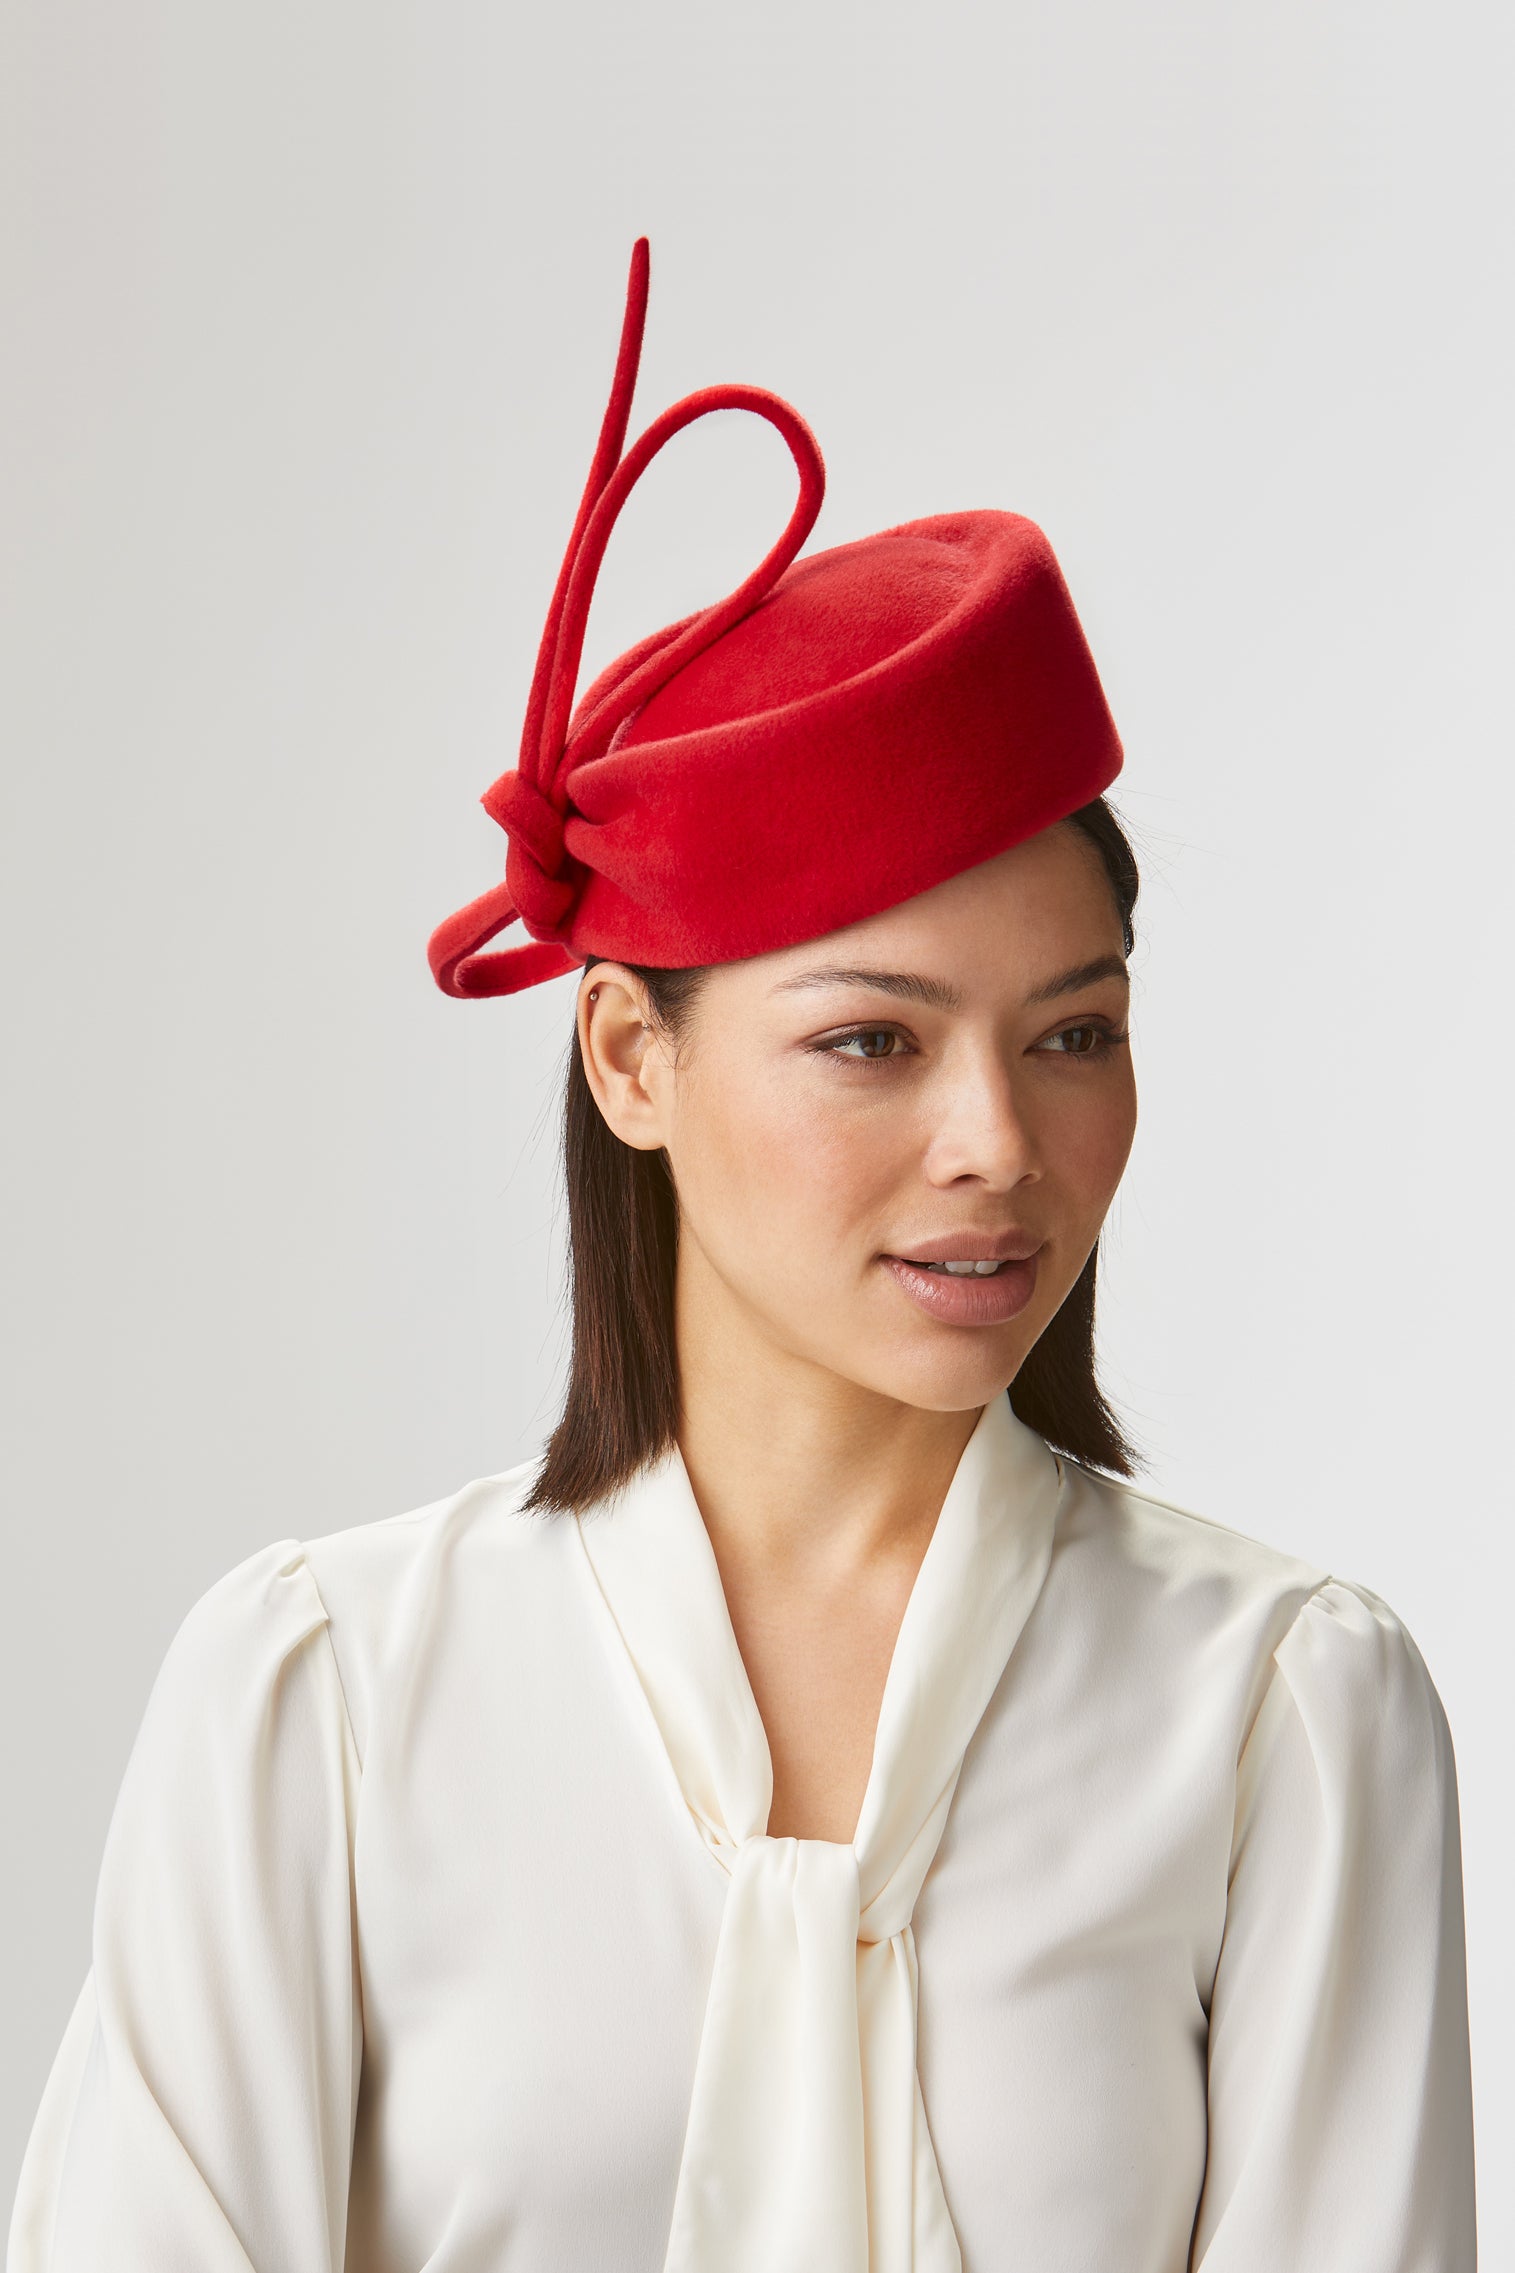 Mayfair Red Pillbox Hat - Products - Lock & Co. Hatters London UK